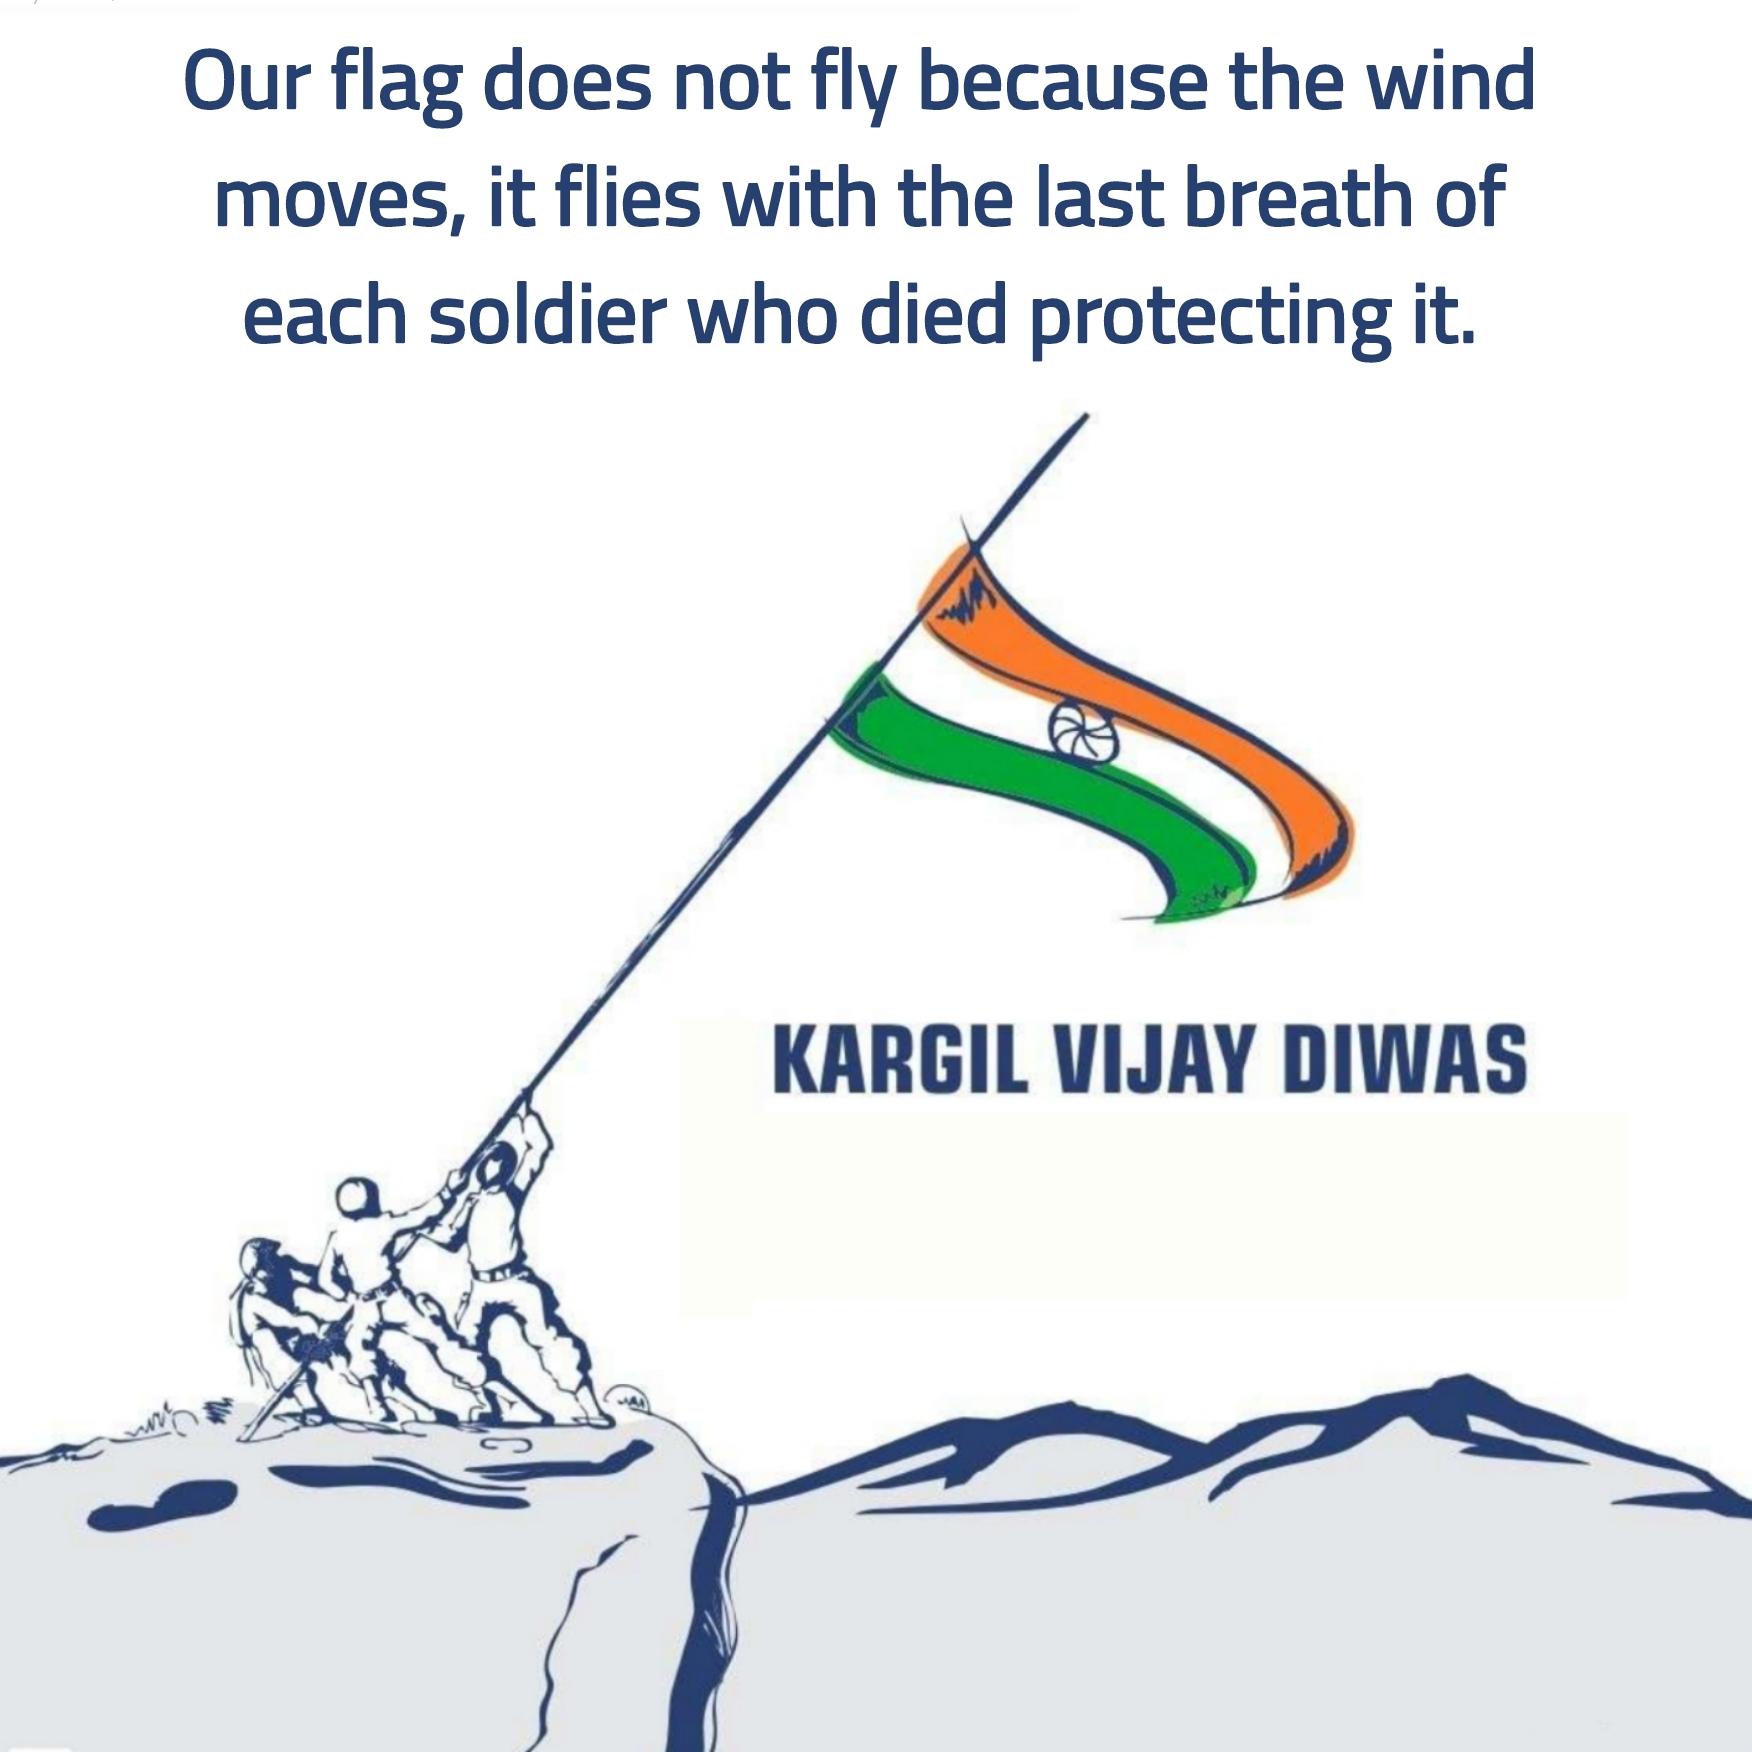 Our flag does not fly because the wind moves